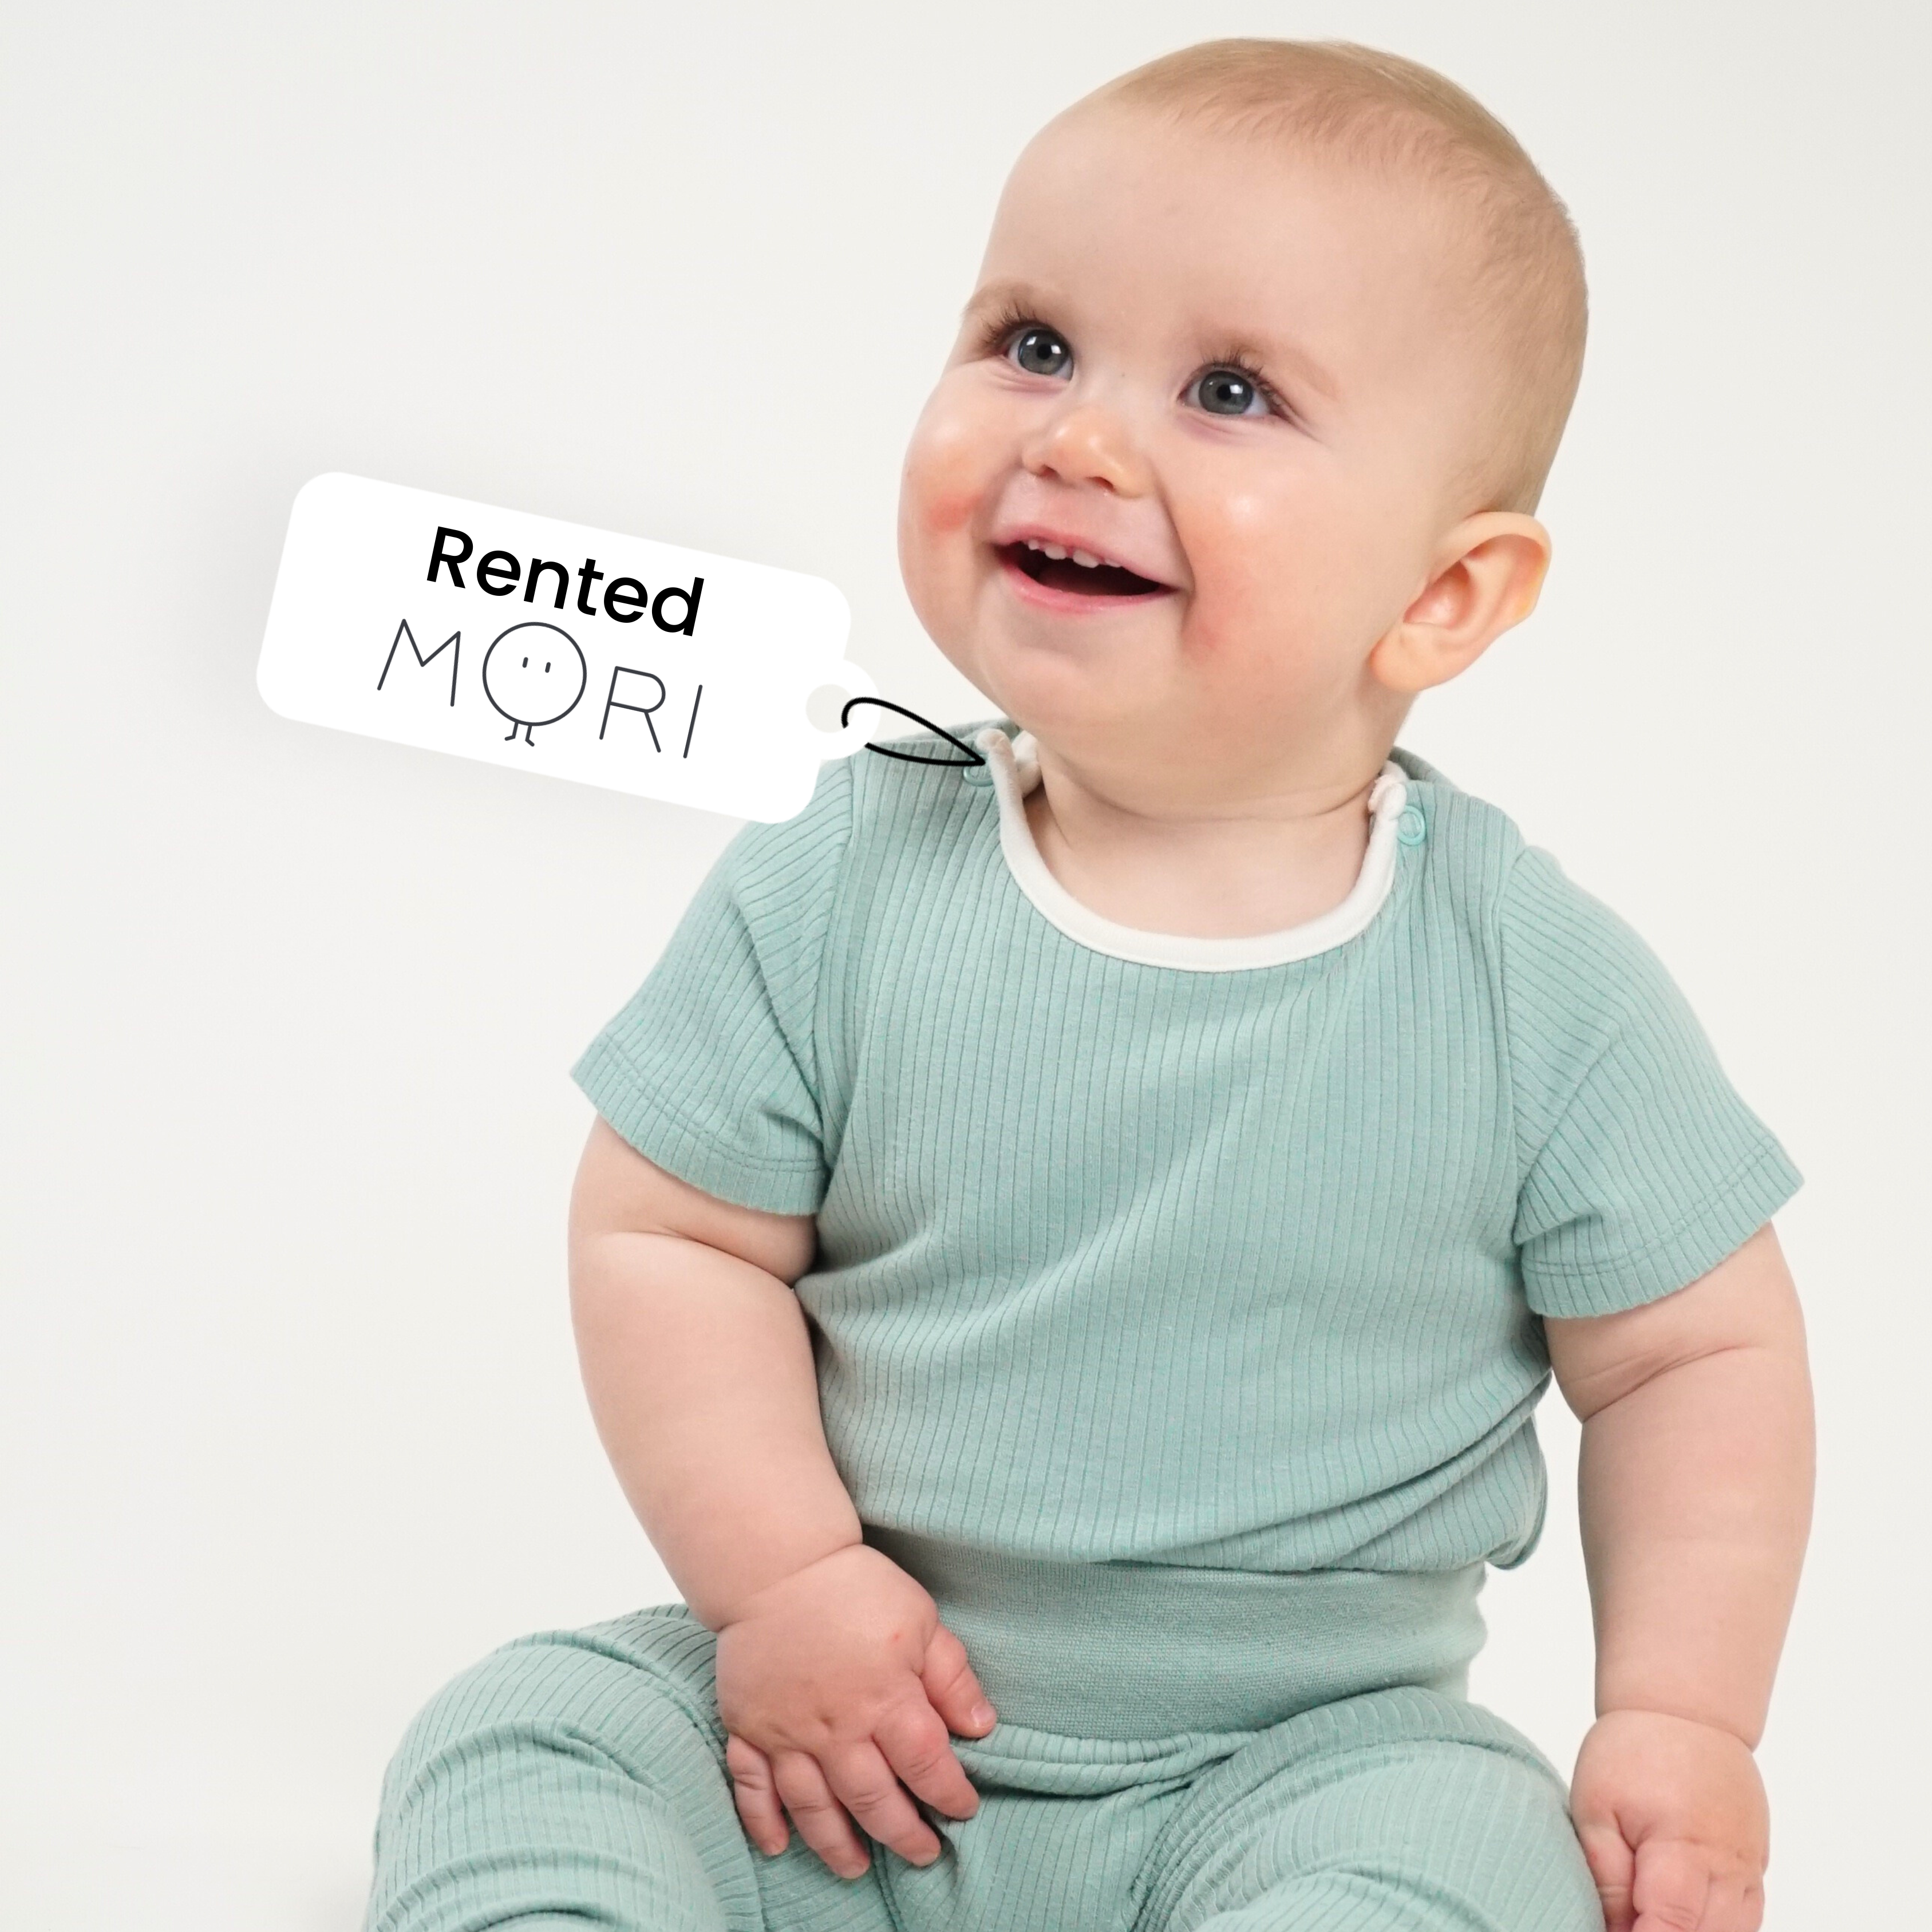 Baby in MORI baby clothes - rent baby clothes with Bundlee